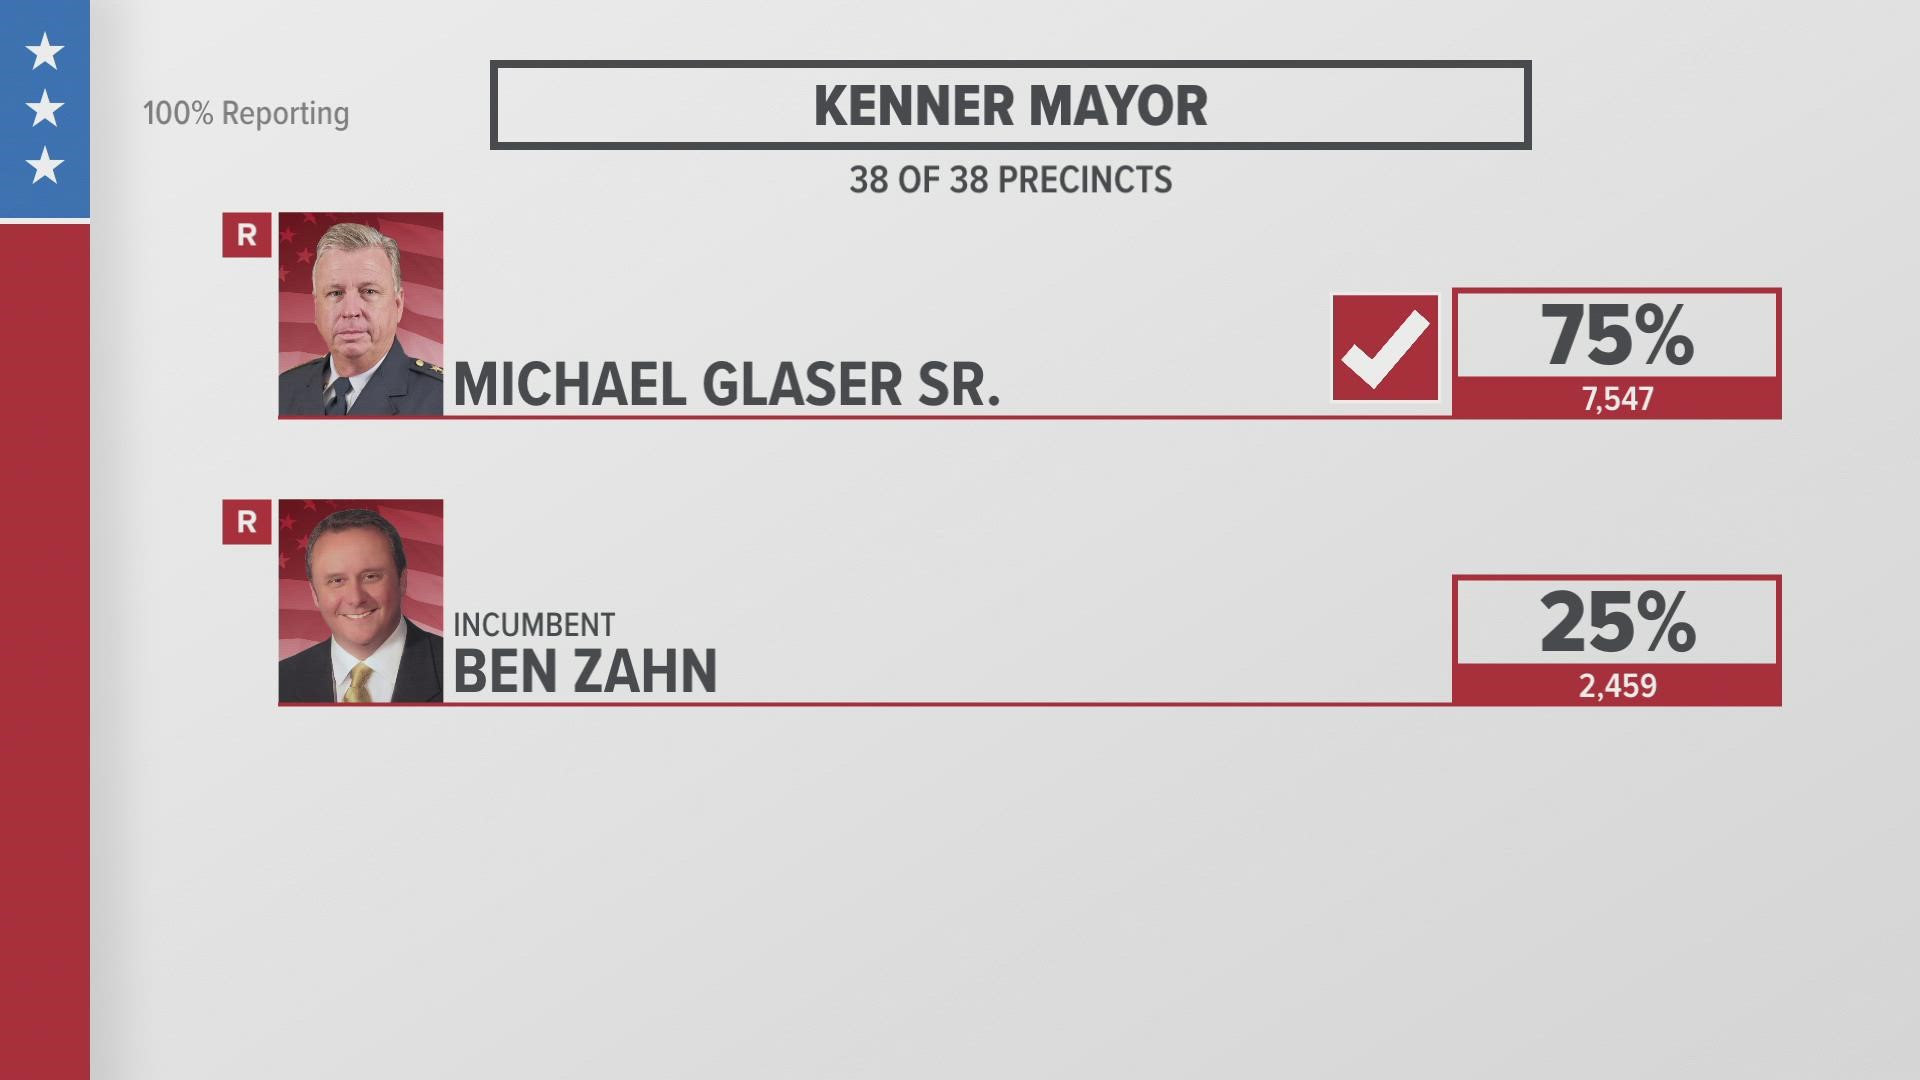 Kenner has a new mayor and it is